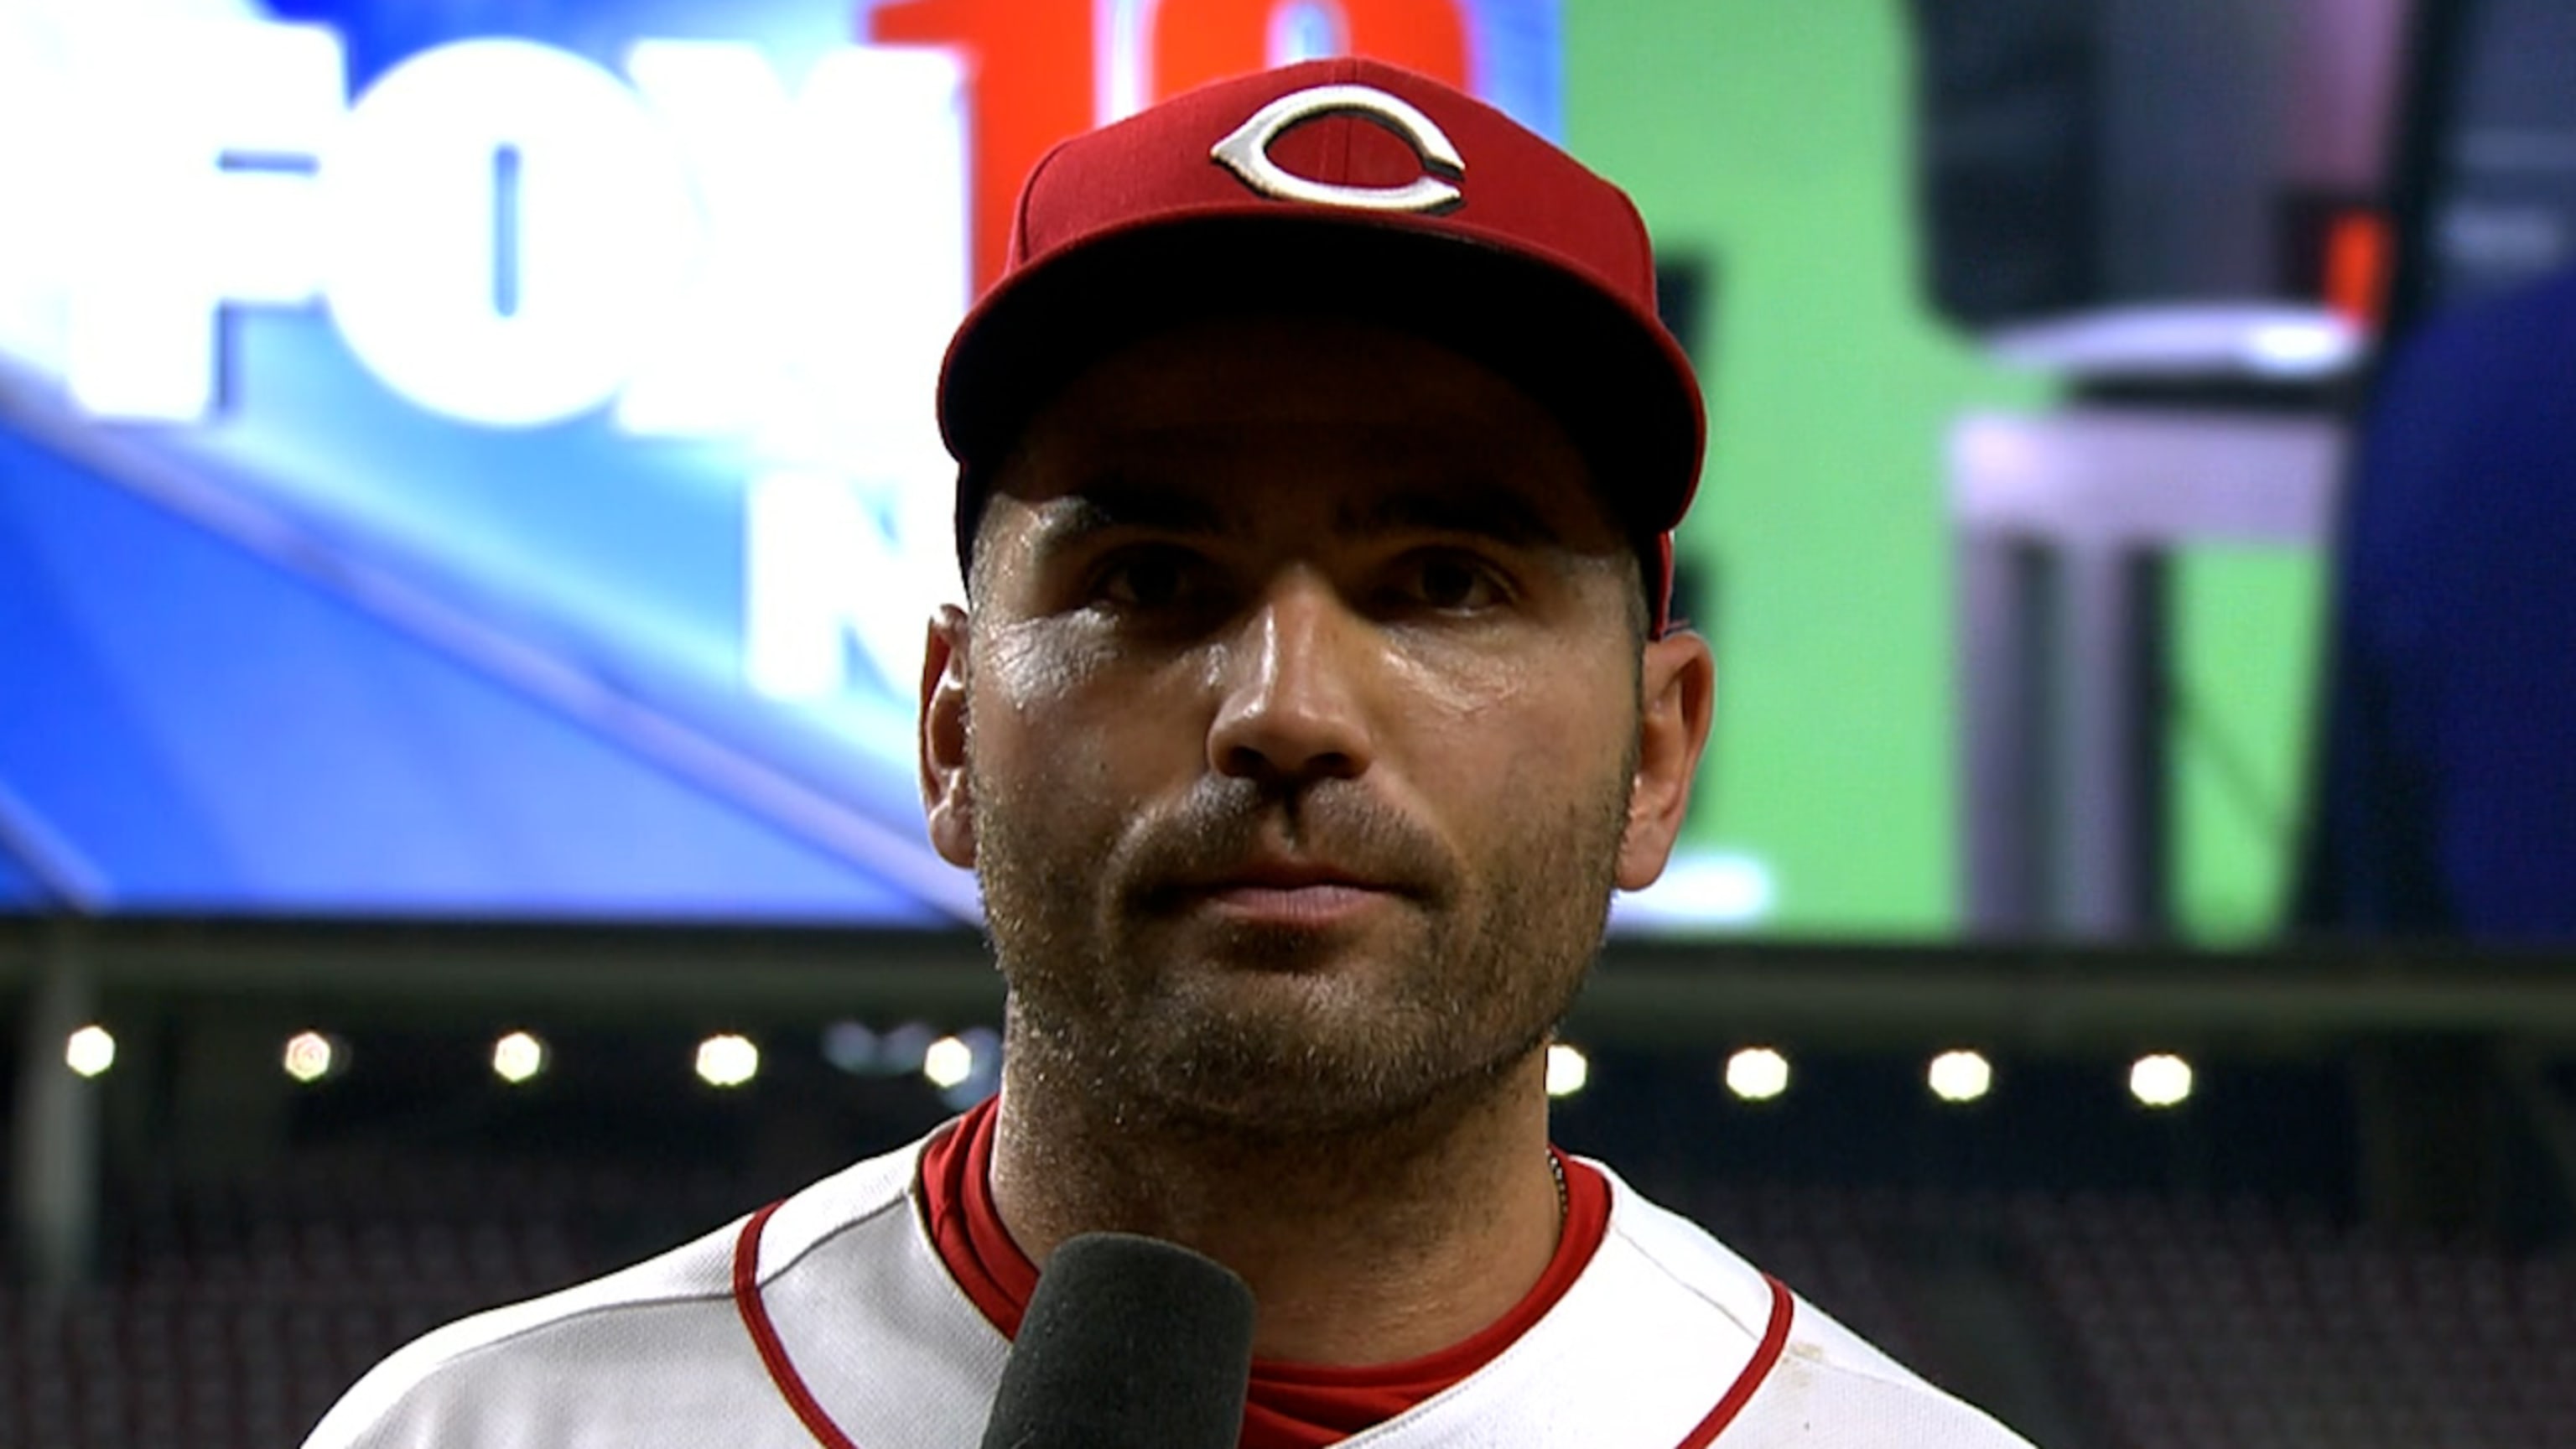 On the Road With Joey Votto, Who Hasn't Turned On a Hotel TV in 15 Years